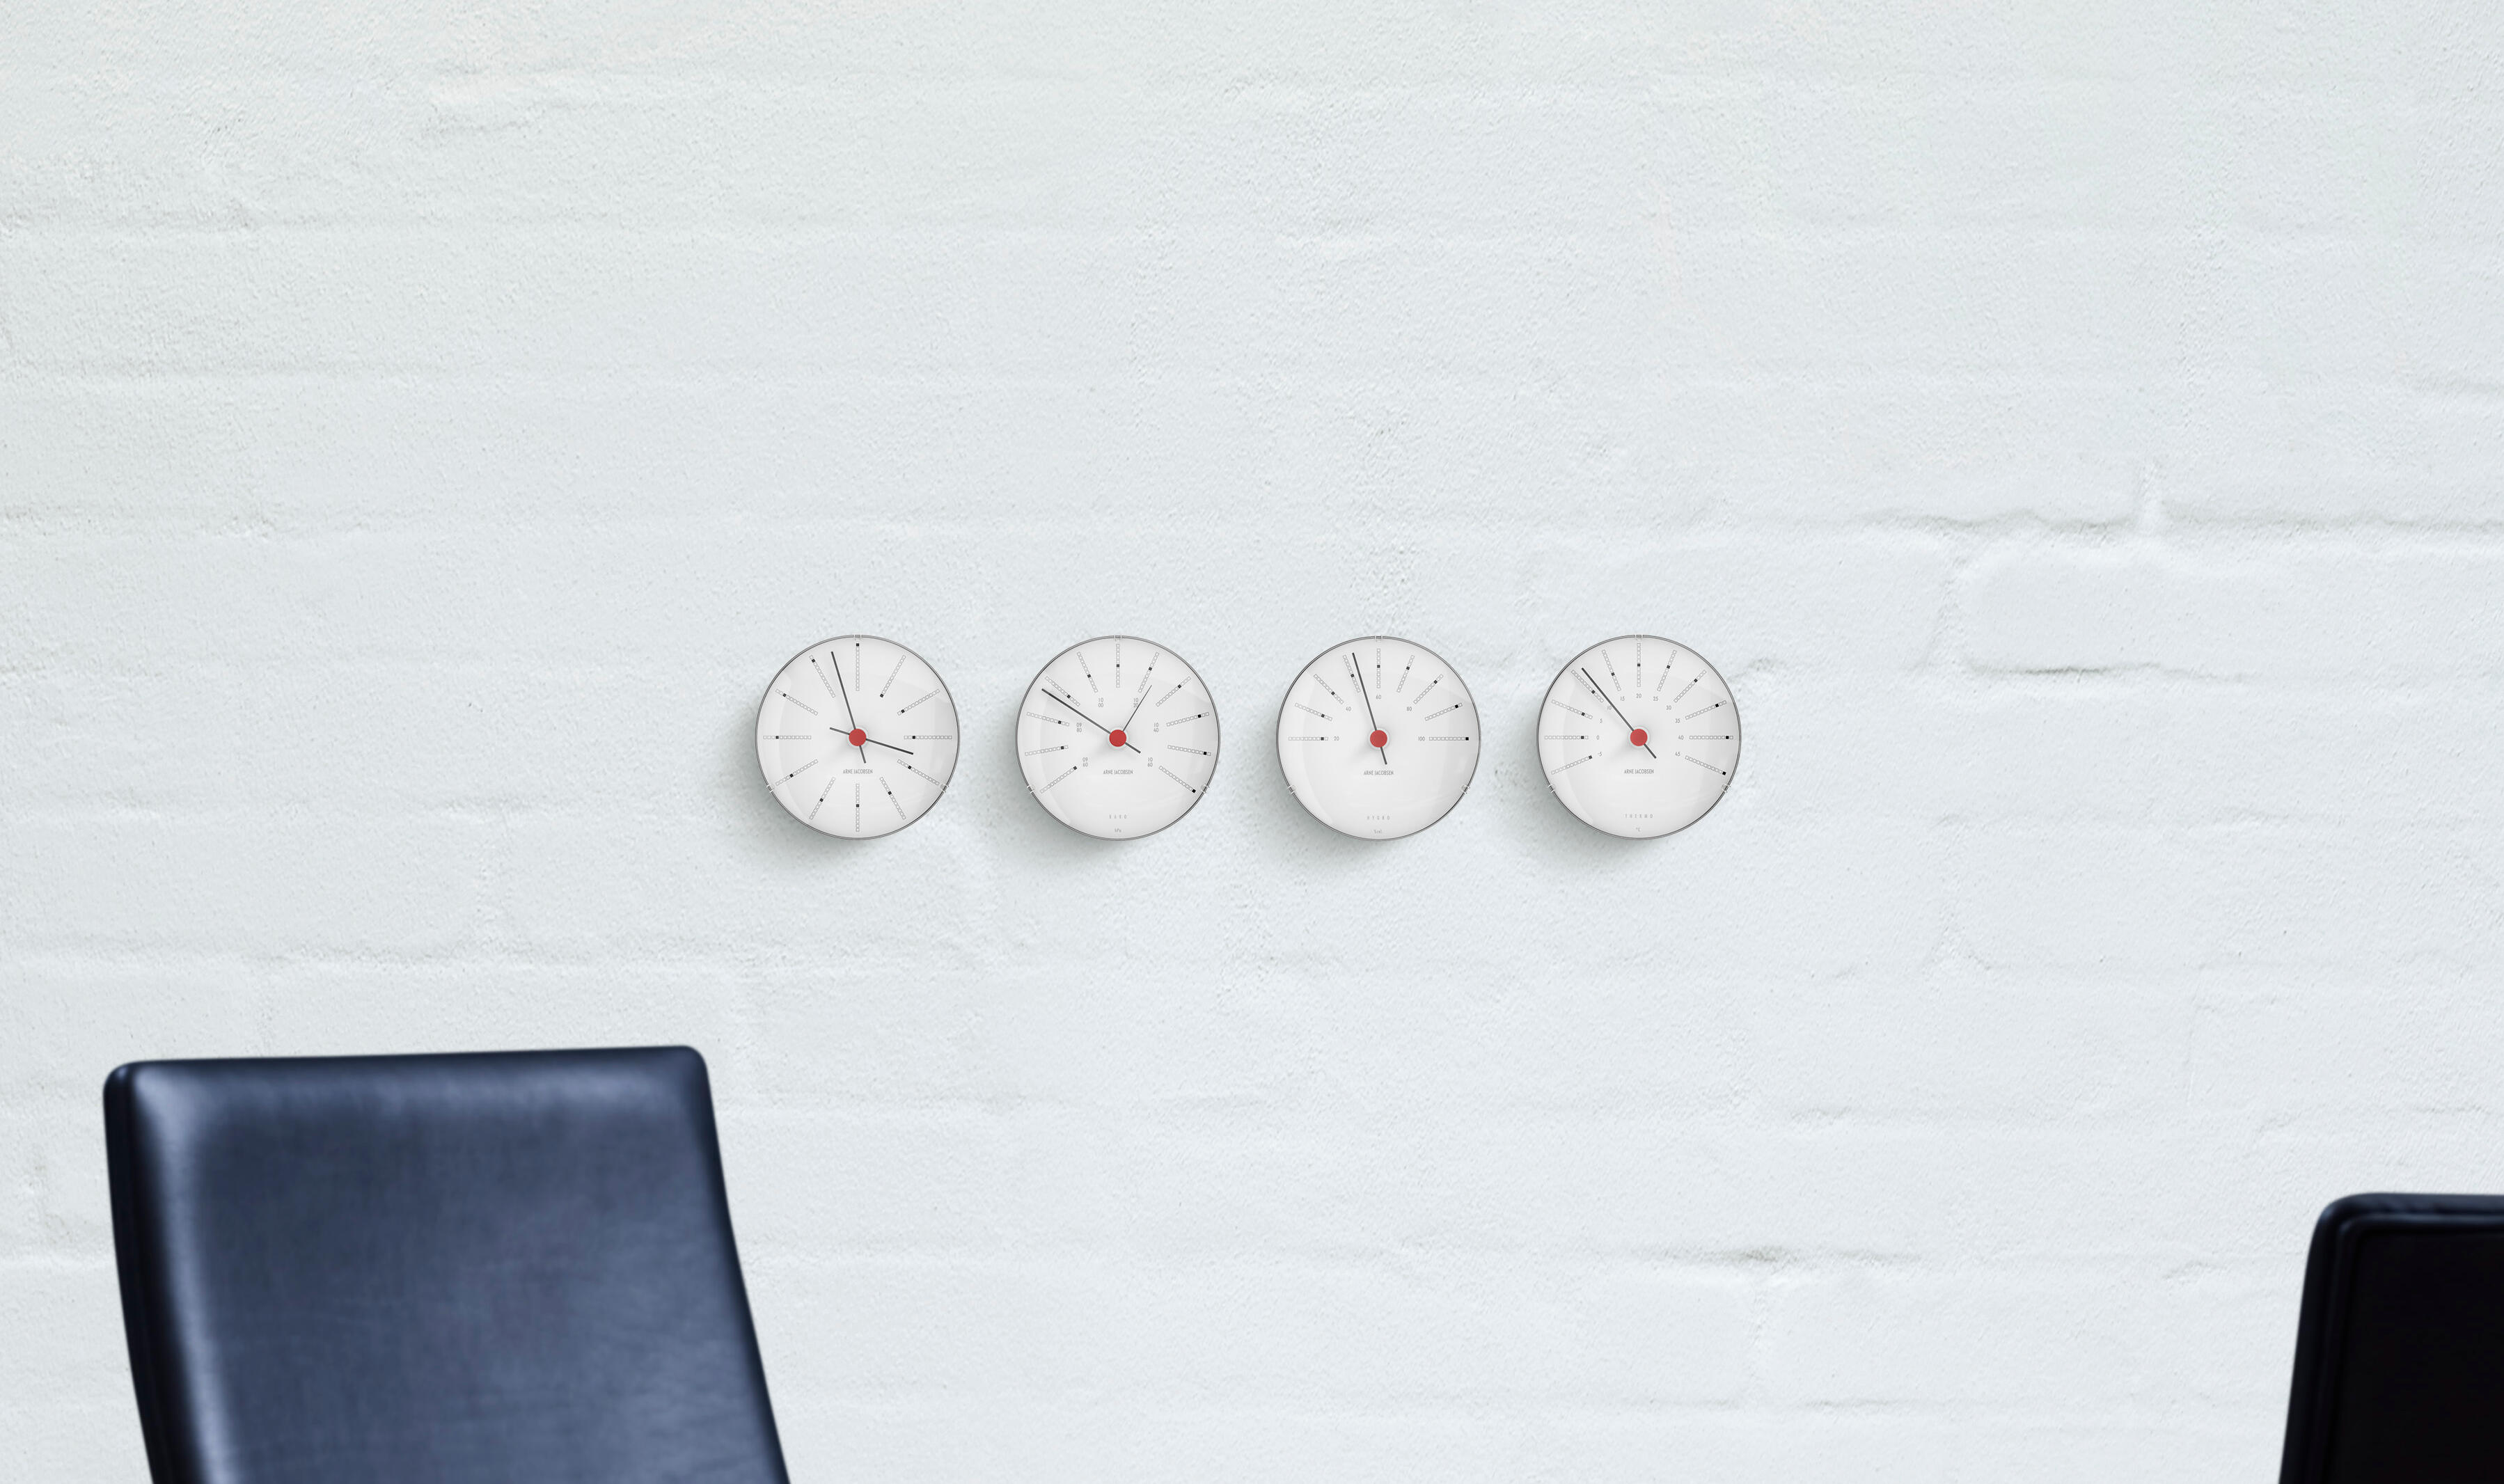 Clocks and weather stations from Arne Jacobsen.